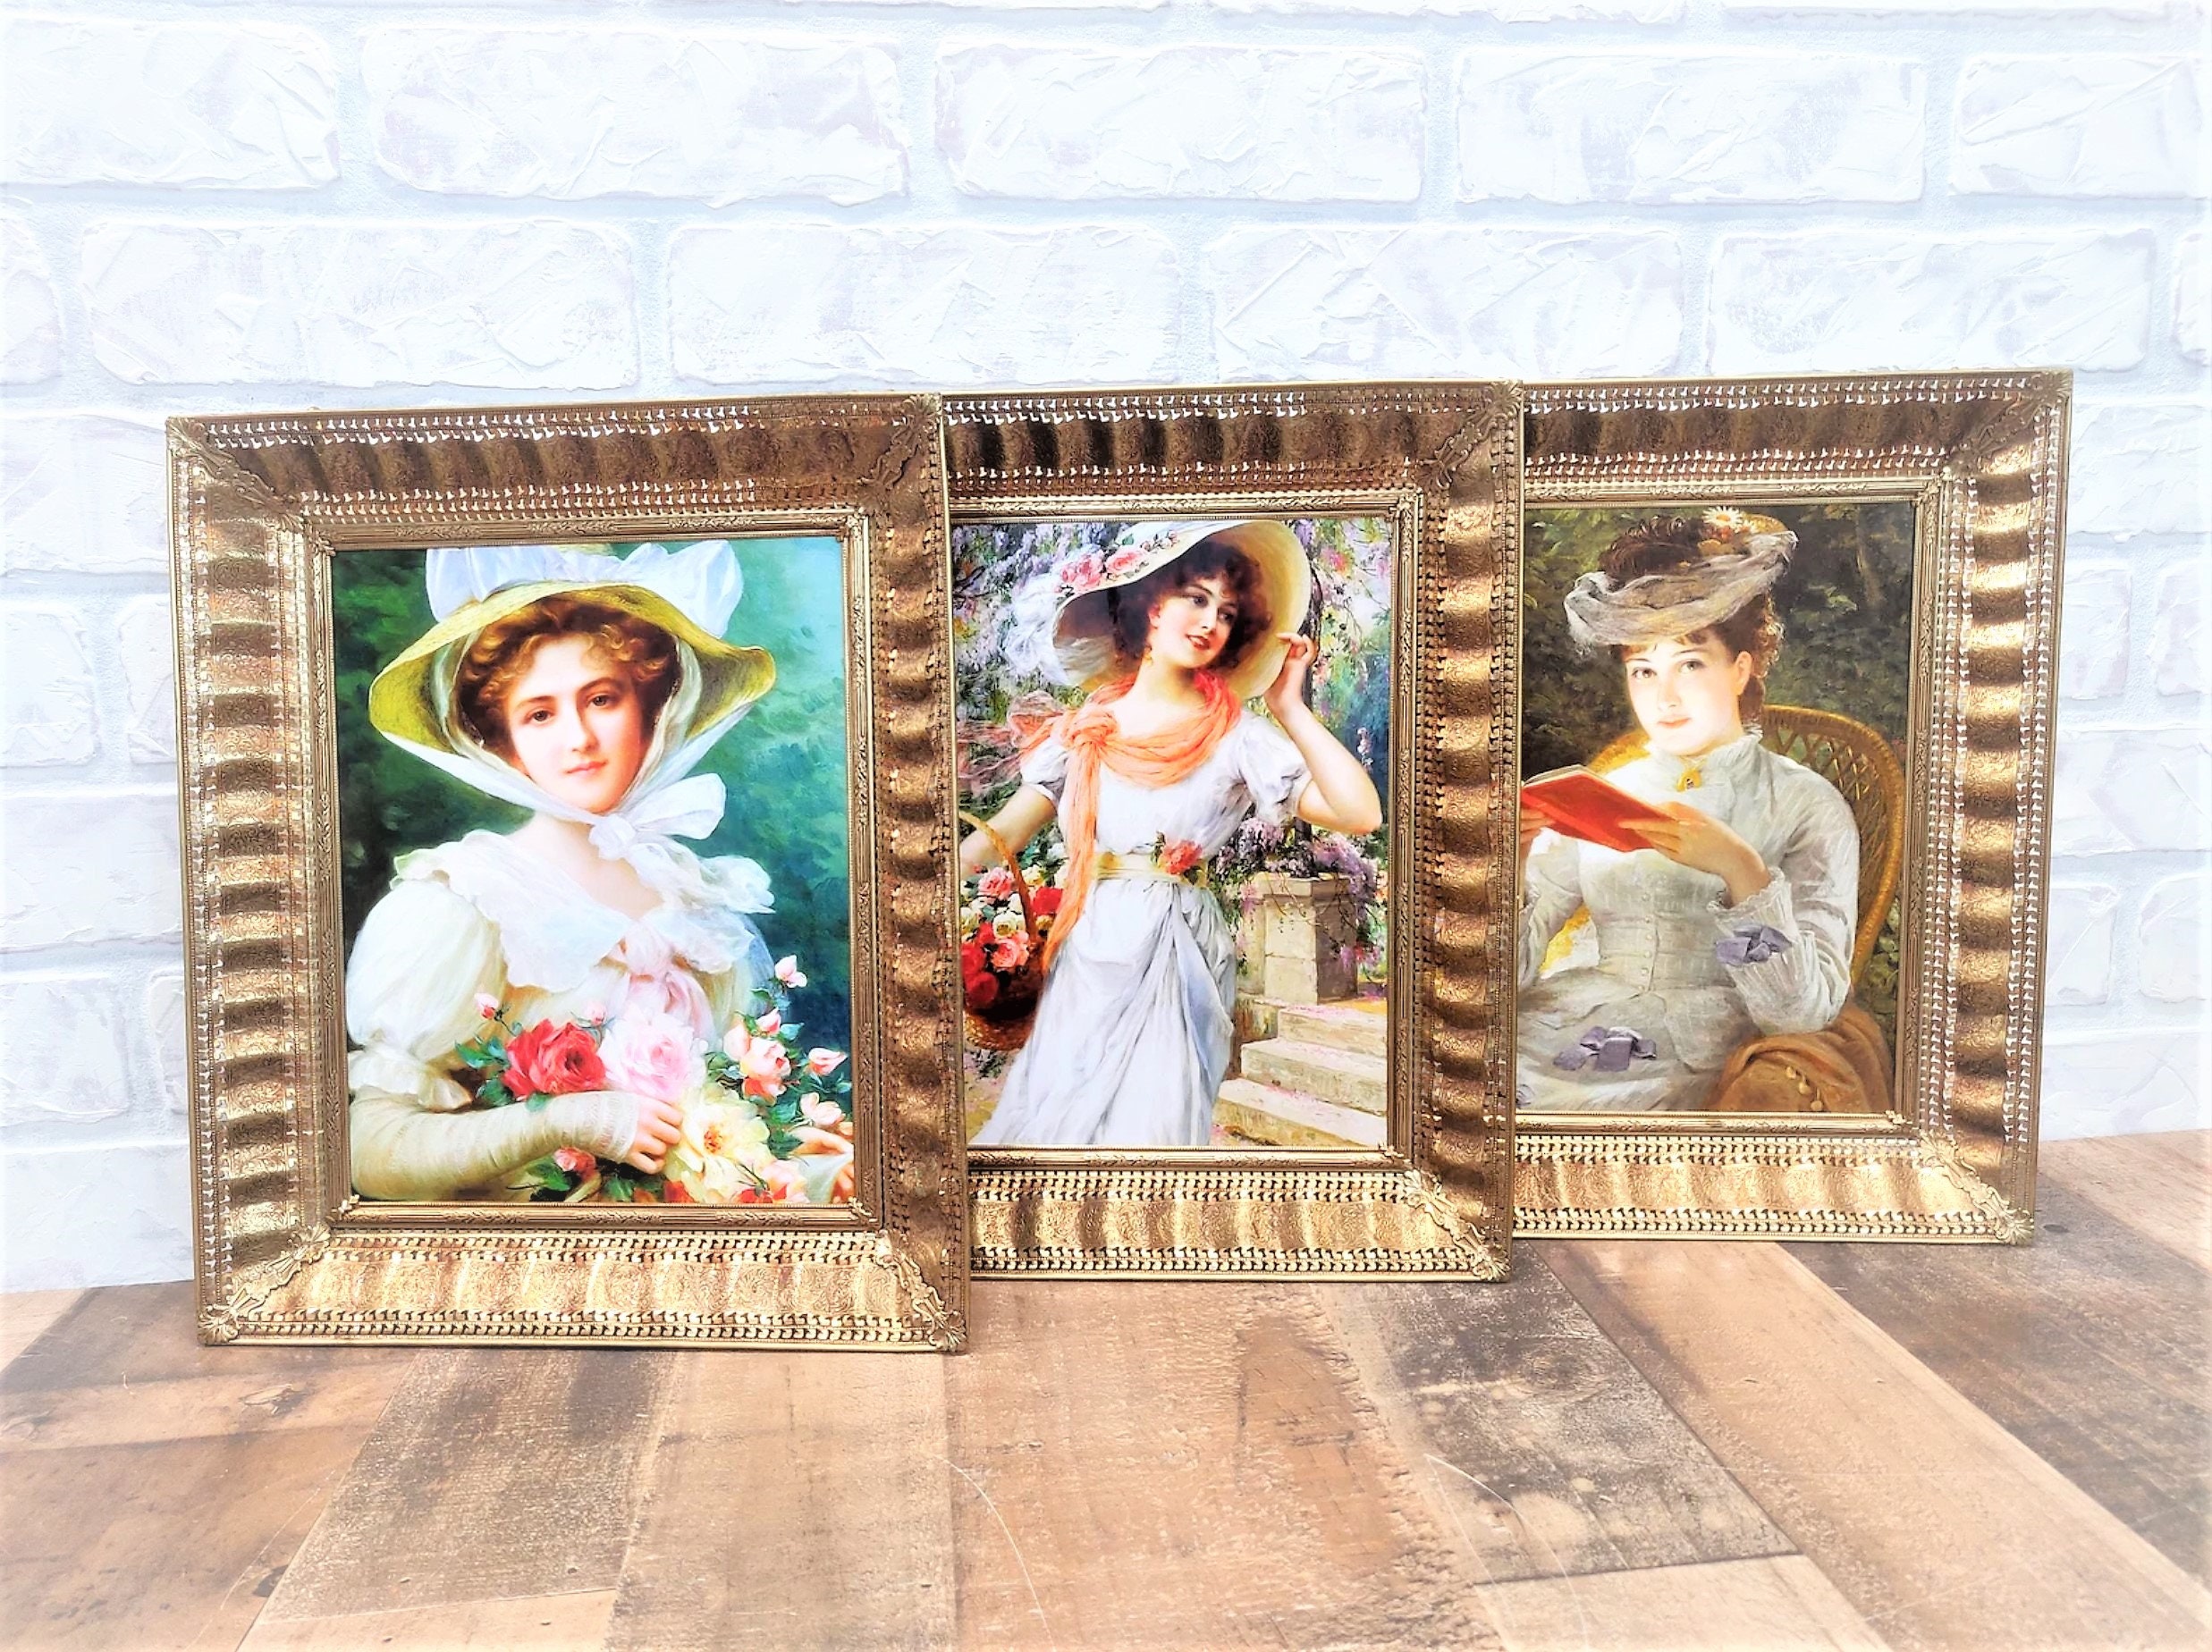 Florentine Wood Leaning Picture Frame Easel Stand White Gold Style Fits 5x7